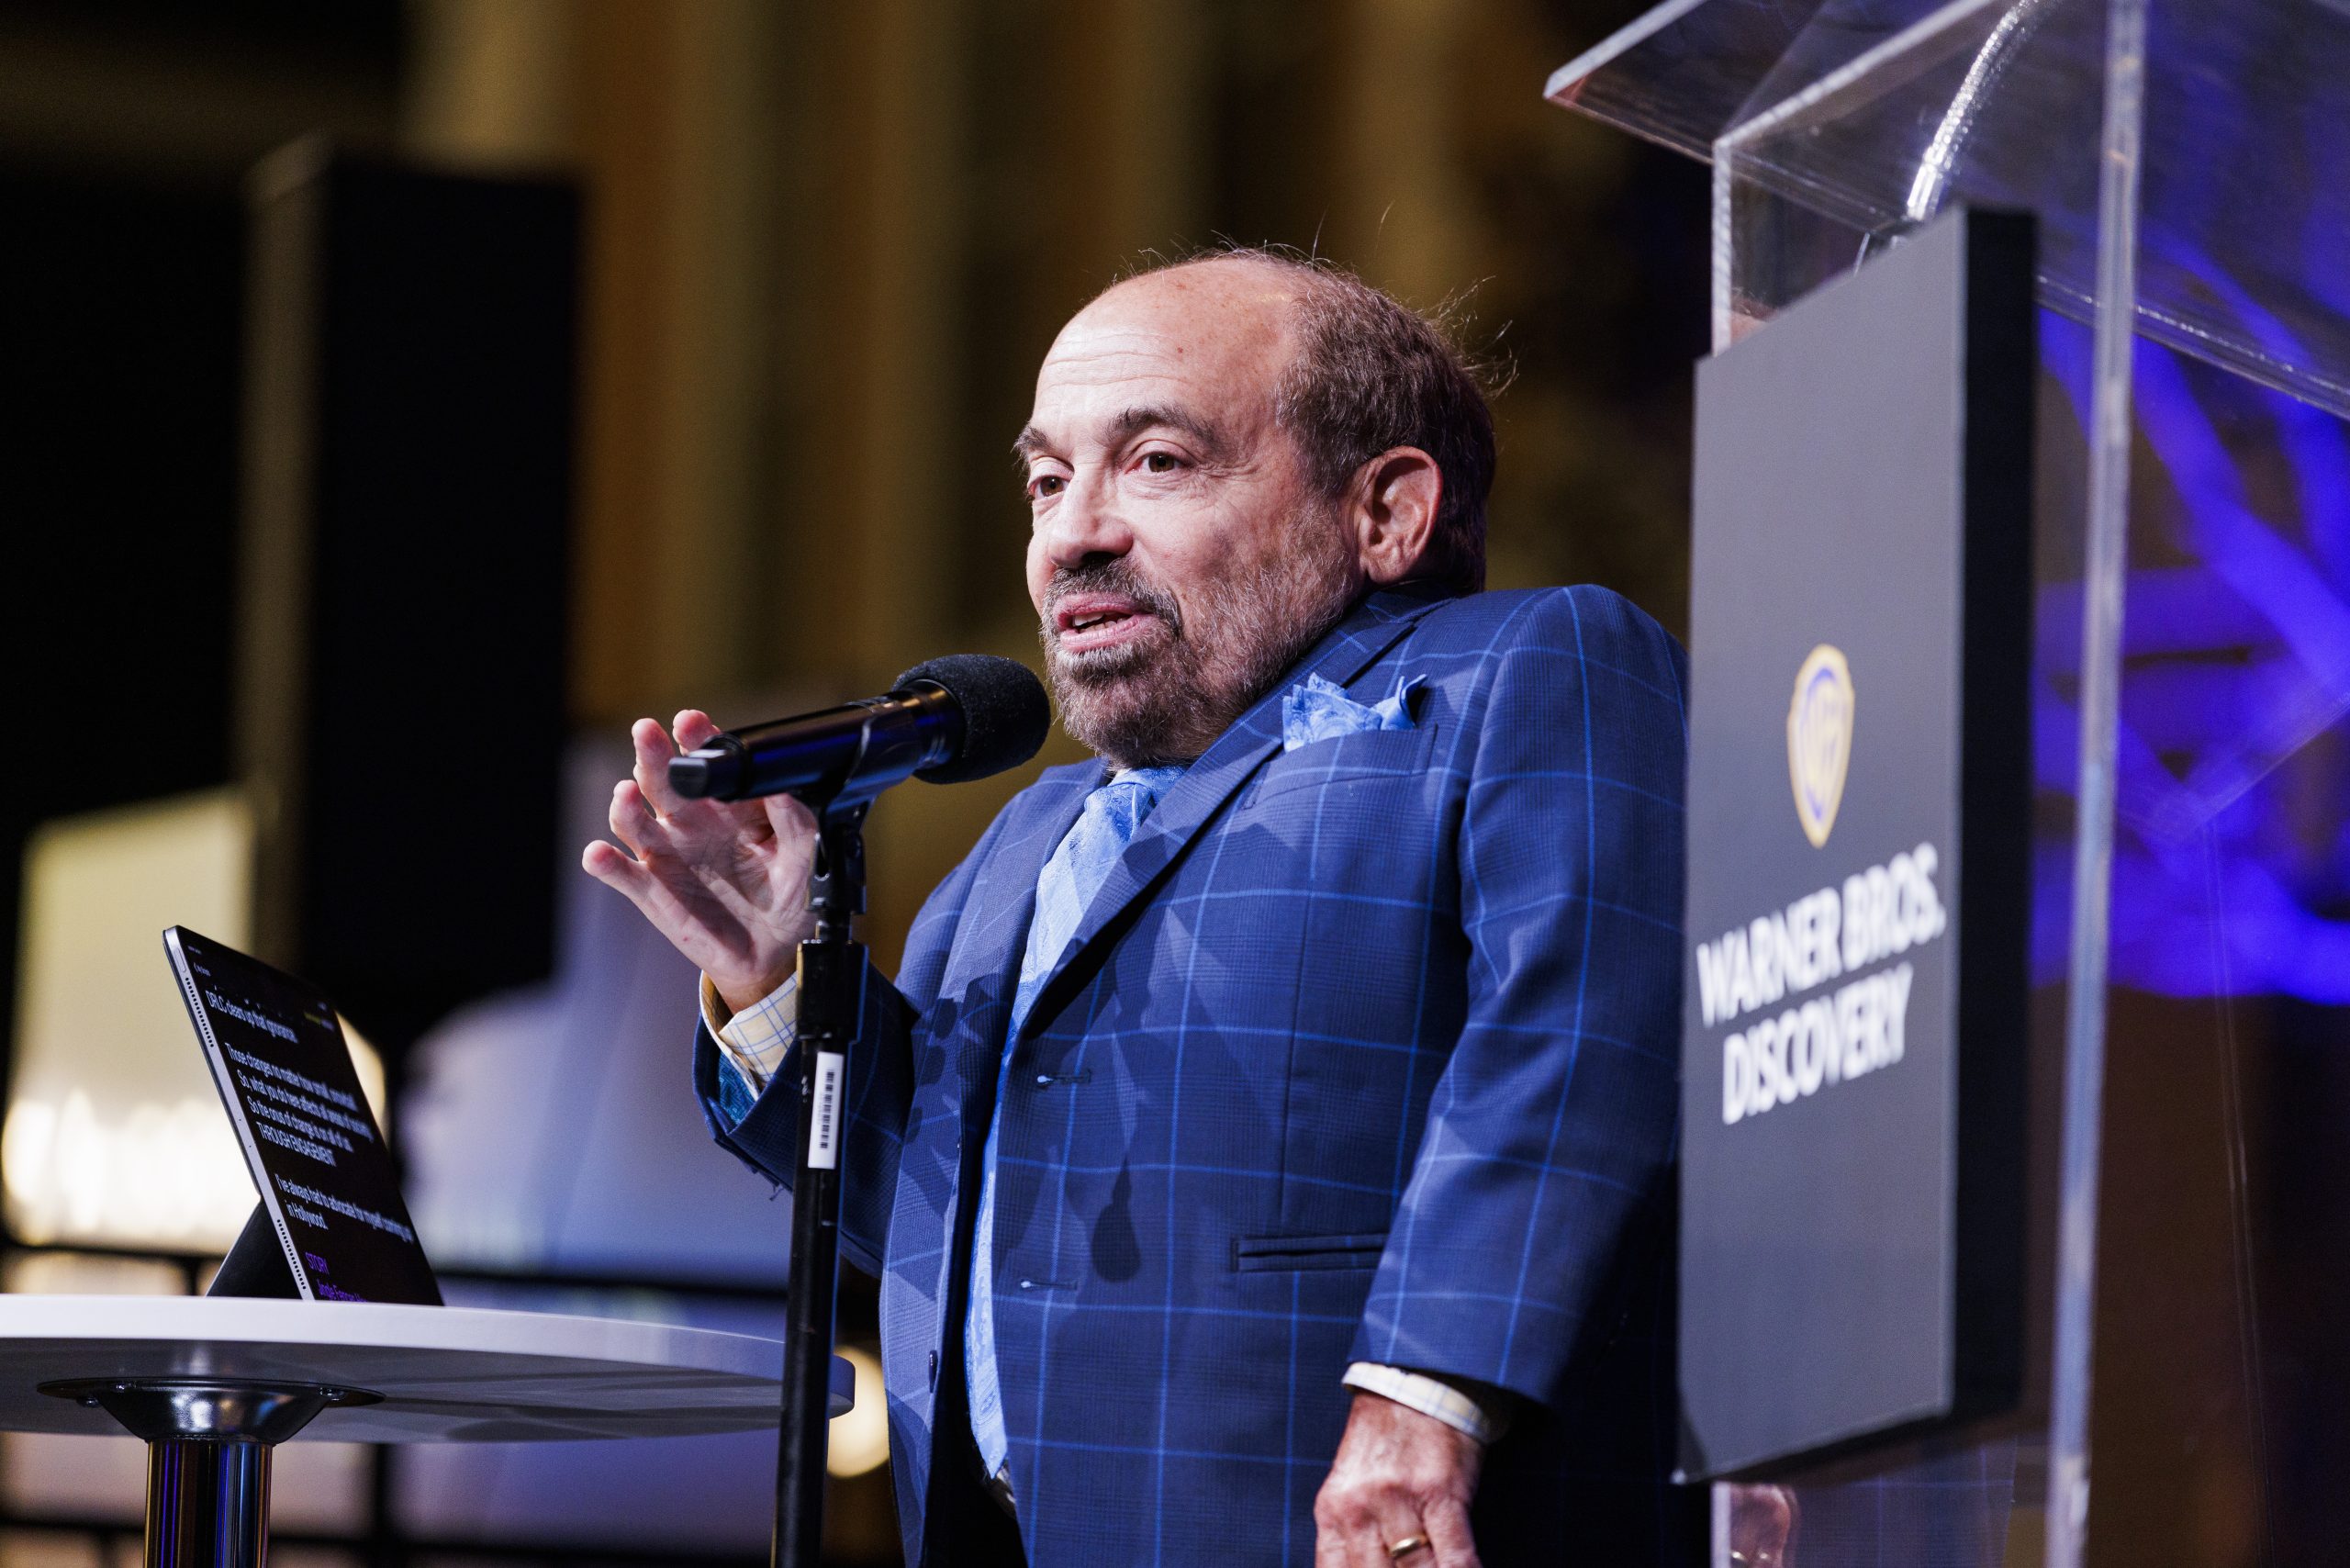 Danny Woodburn, wearing a navy blue suit, addresses the crowd from the microphone and gestures with his right hand. To his right is a clear podium with a sign bearing the words "Warner Bros." on the front.